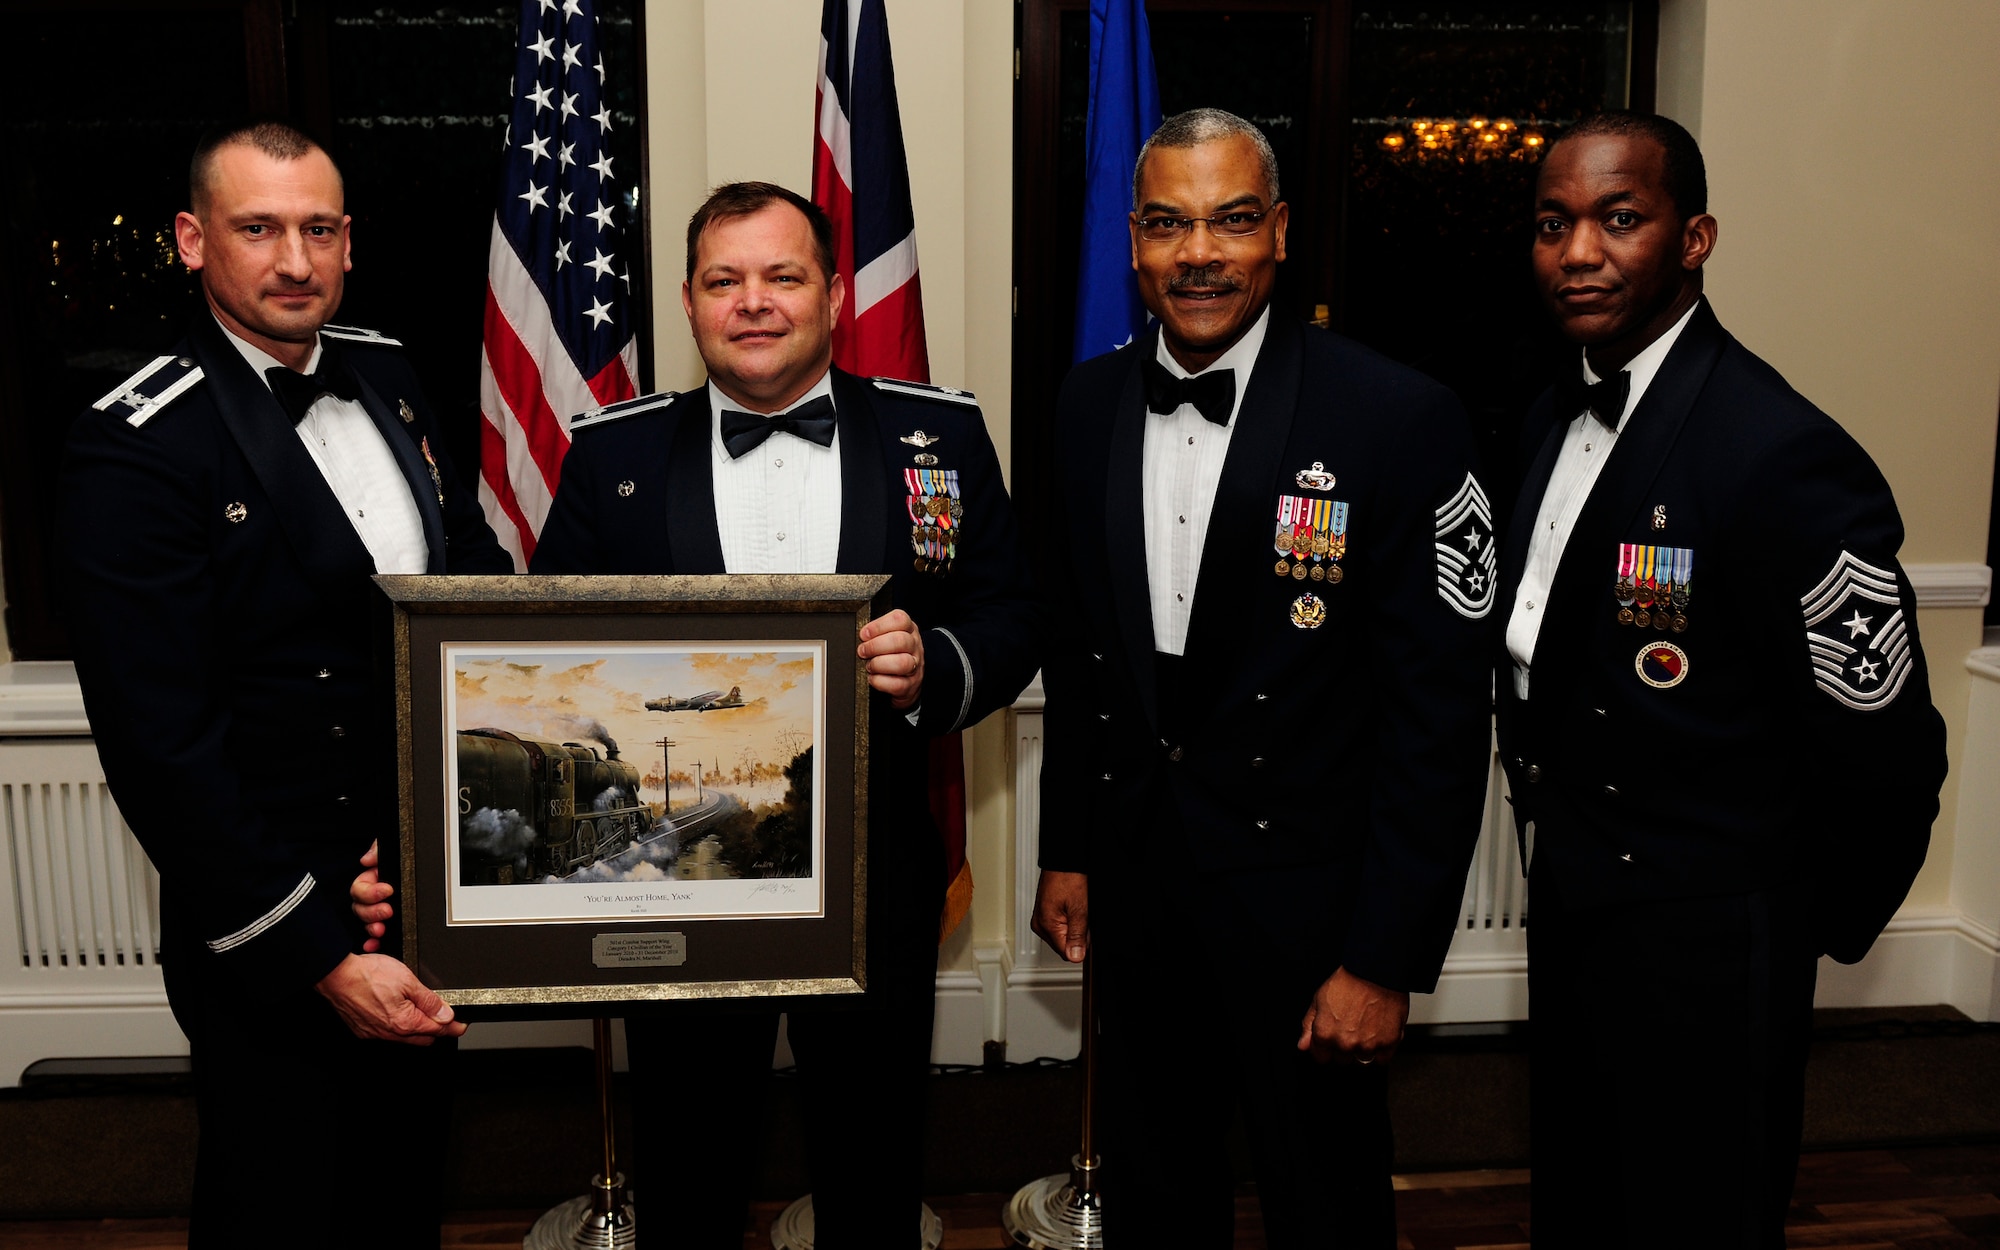 RAF ALCONBURY, United Kingdom - Lt. Col. Richard Rachal accepts the Civilian Category One of the Year Award on behalf of Dieadra Marshall during the 501st Combat Support Wing Annual Awards Ceremony Feb. 4 at RAF Alconbury. Ms. Marshall, who is assigned to the 421st Air Base Group,  was unable to attend. (U.S. Air Force photo by Tech. Sgt. John Barton)